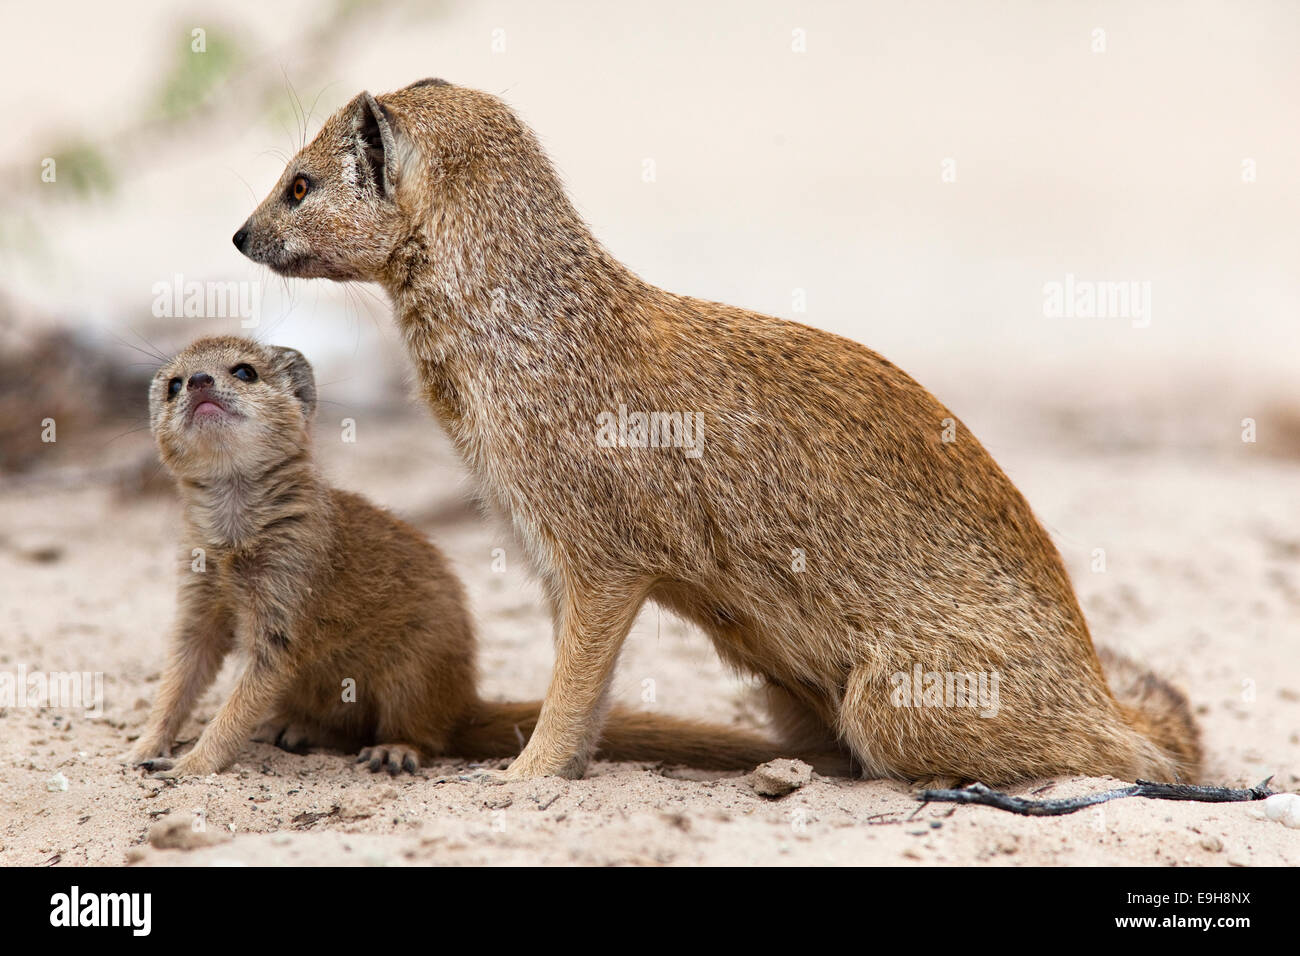 Yellow mongoose, Cynictis penicillata, with young, Kgalagadi Transfrontier Park, South Africa Stock Photo